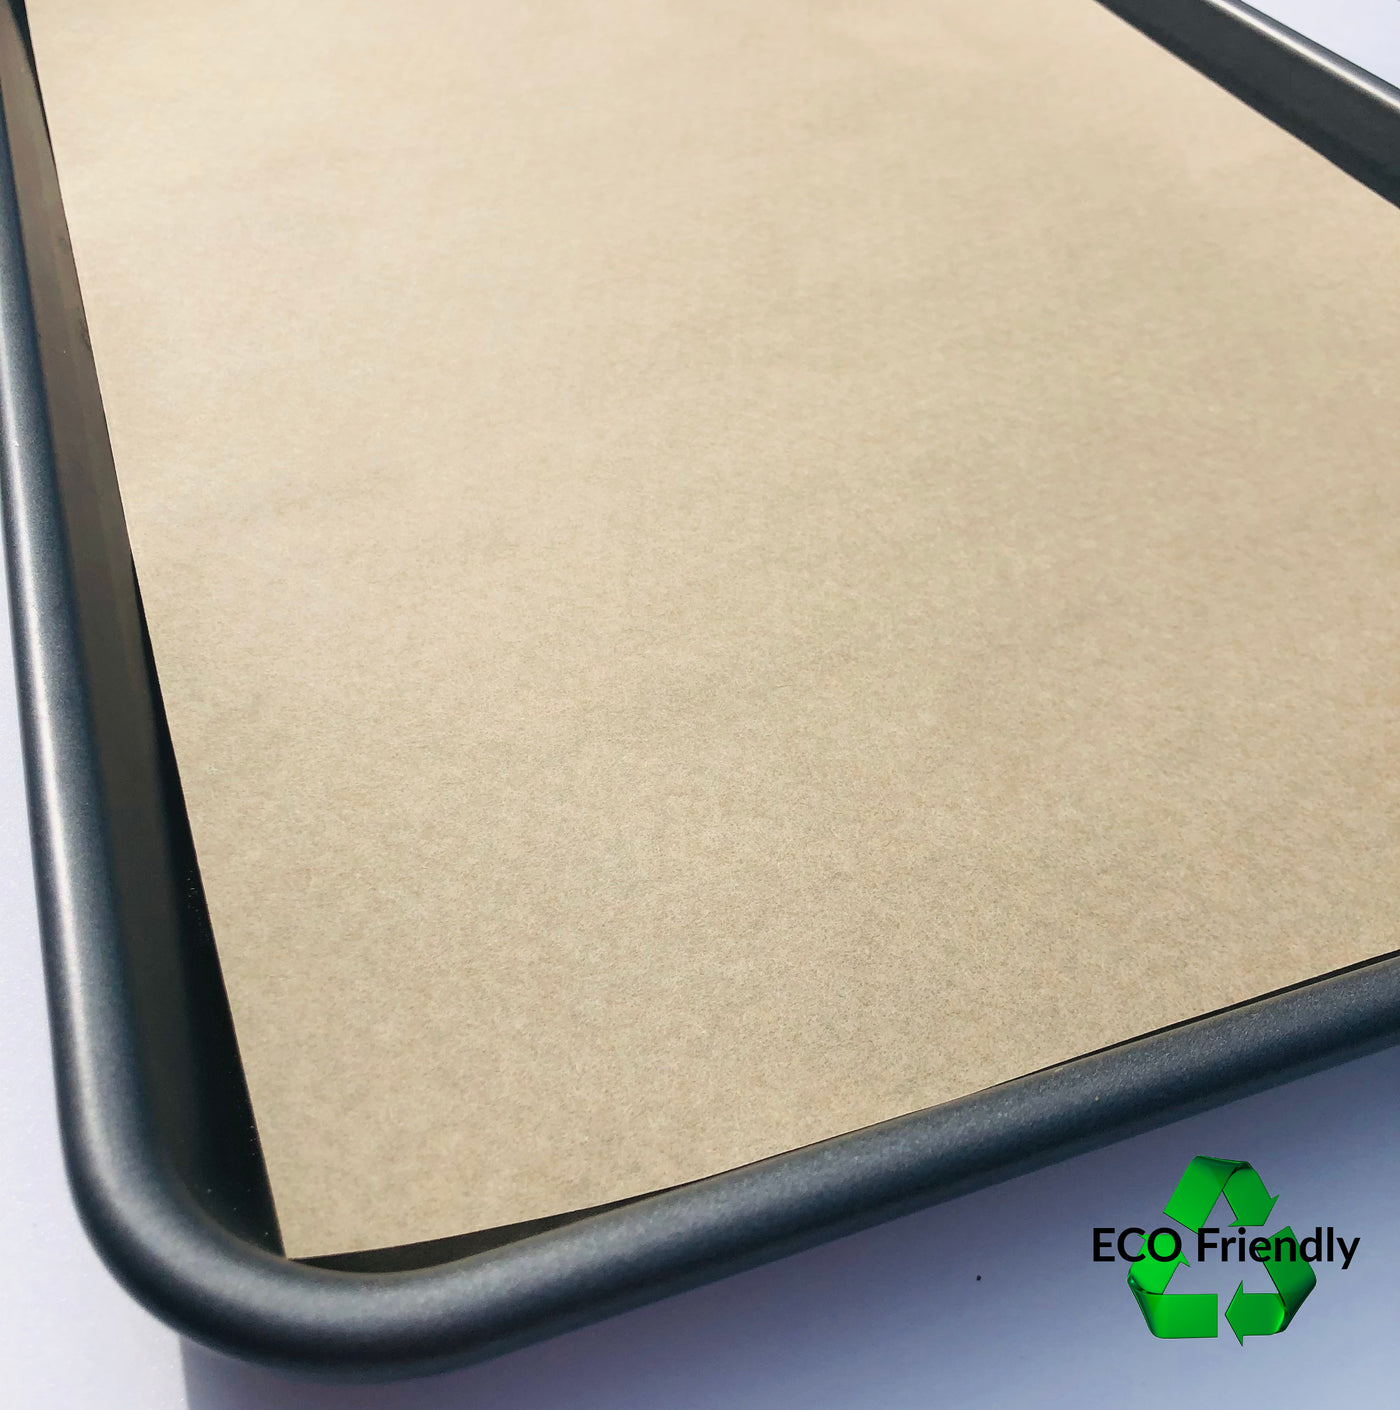 Baking Sheets- Quilon Coated Natural Parchment Paper for Sheet